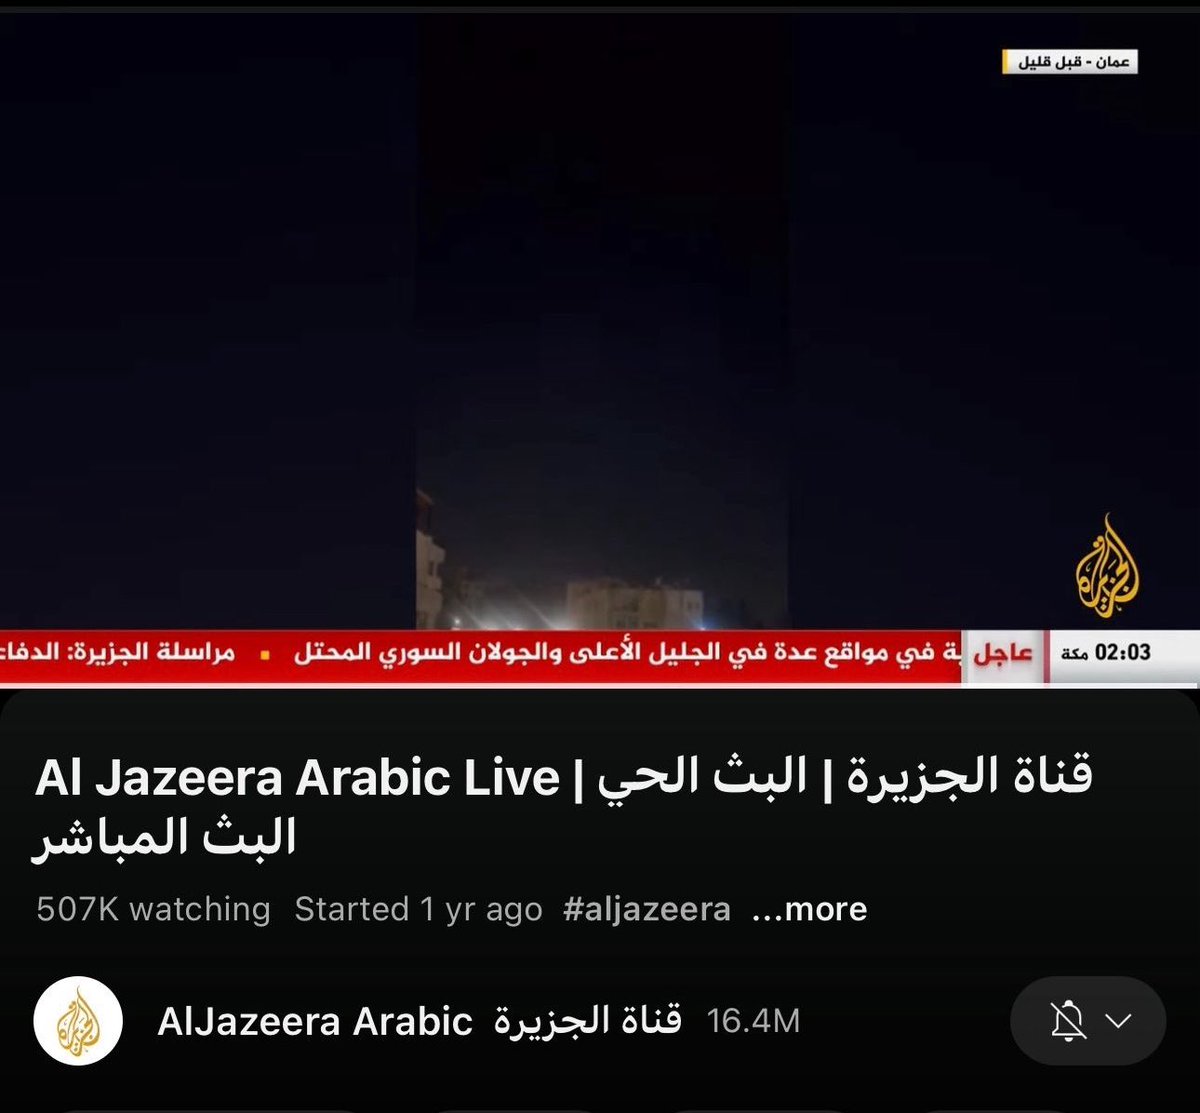 Absolutely remarkable! Our dedicated teams at Al Jazeera, both on the ground and in our newsroom, continue to deliver unparalleled coverage of the region. With over 507,000 simultaneous views on YouTube alone, the world trusts us to bring them the latest developments. Unwavering